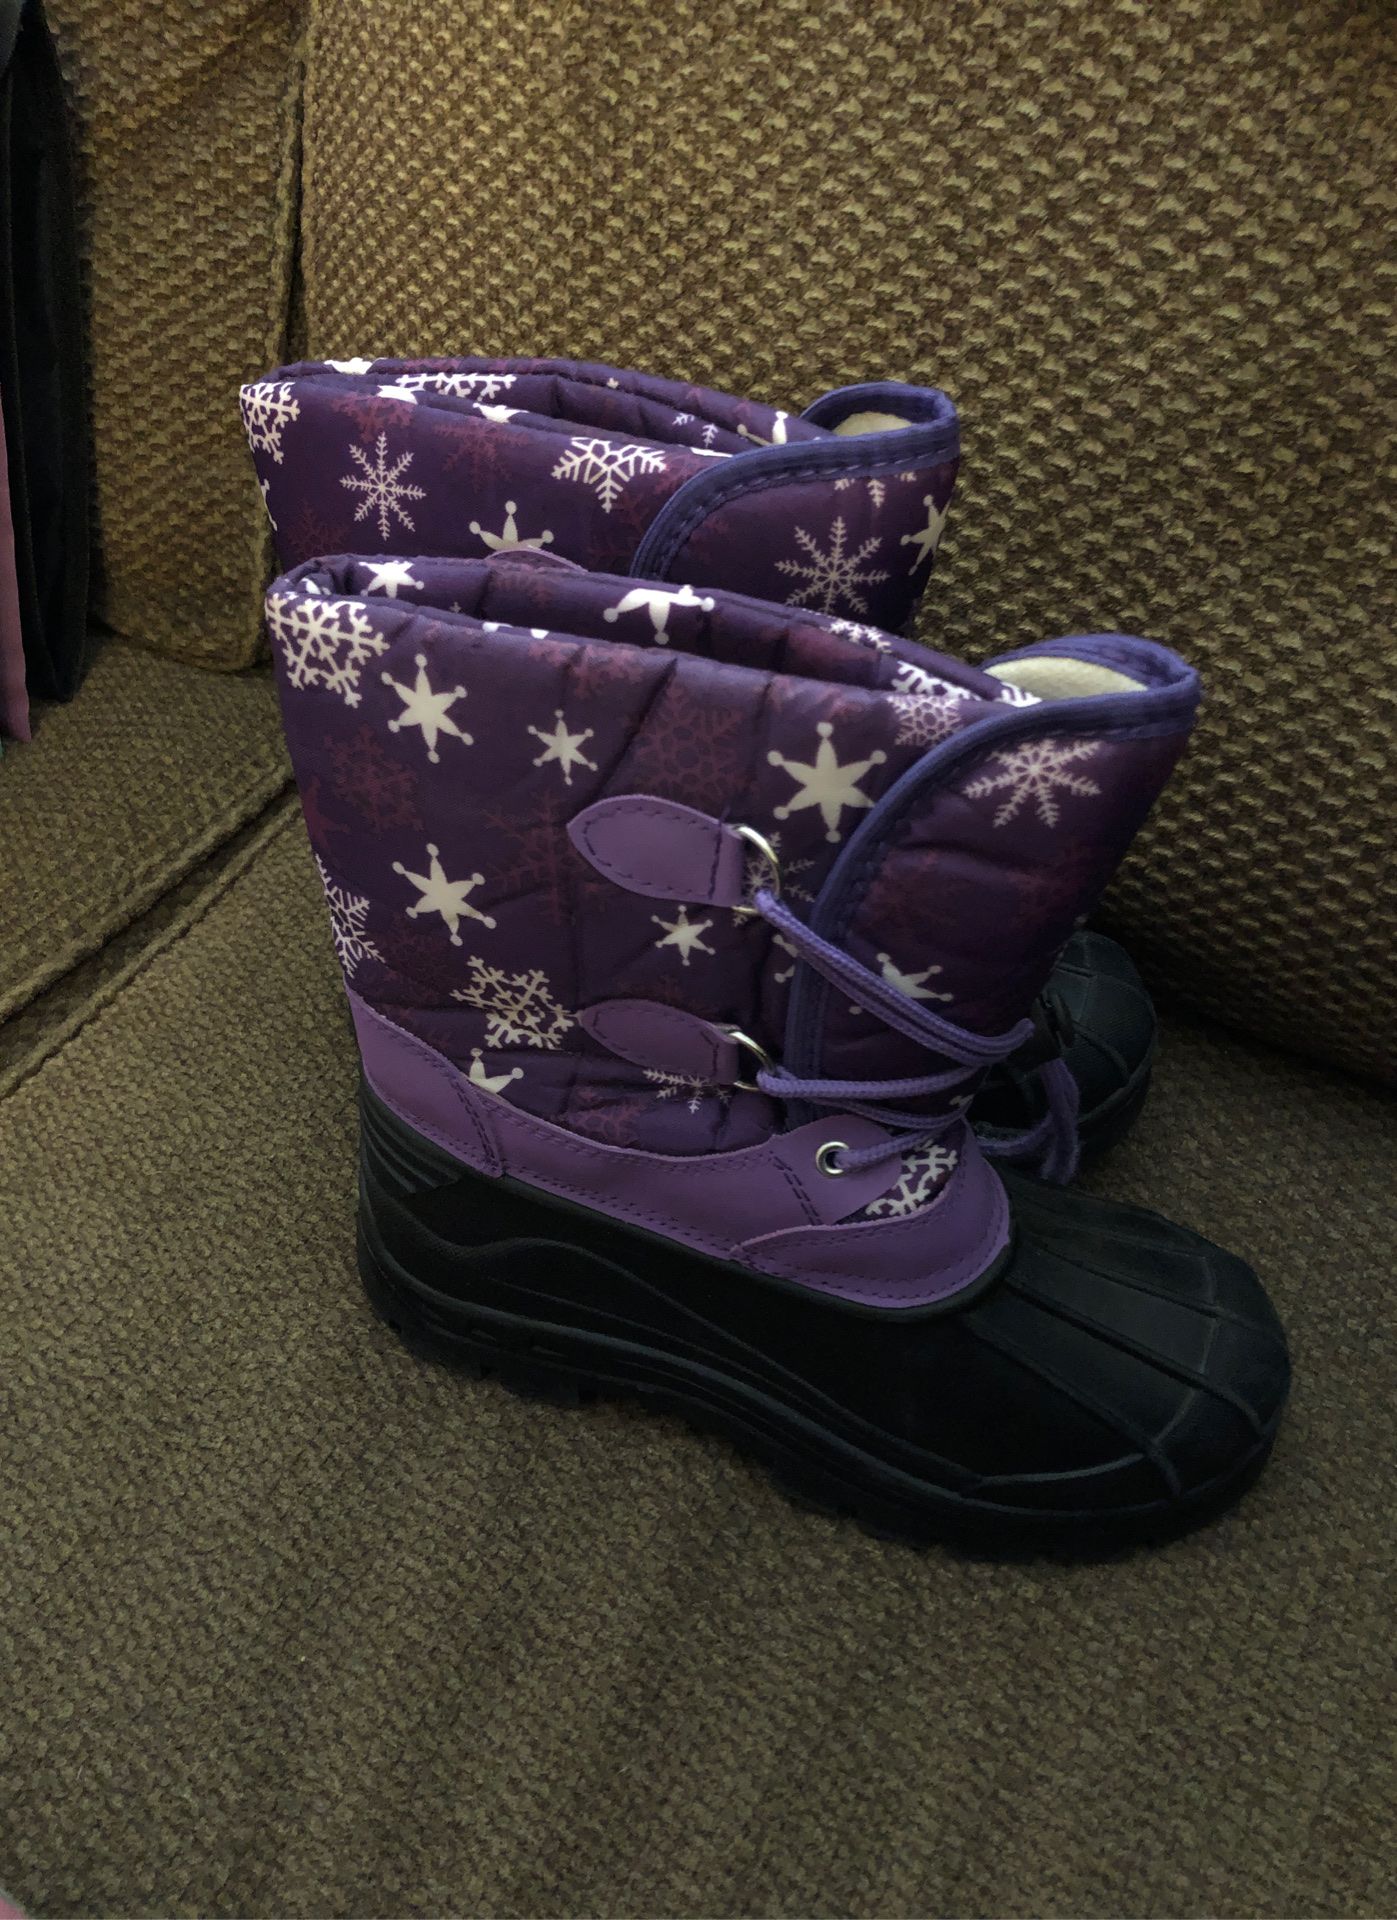 Girls size 4 snow boots